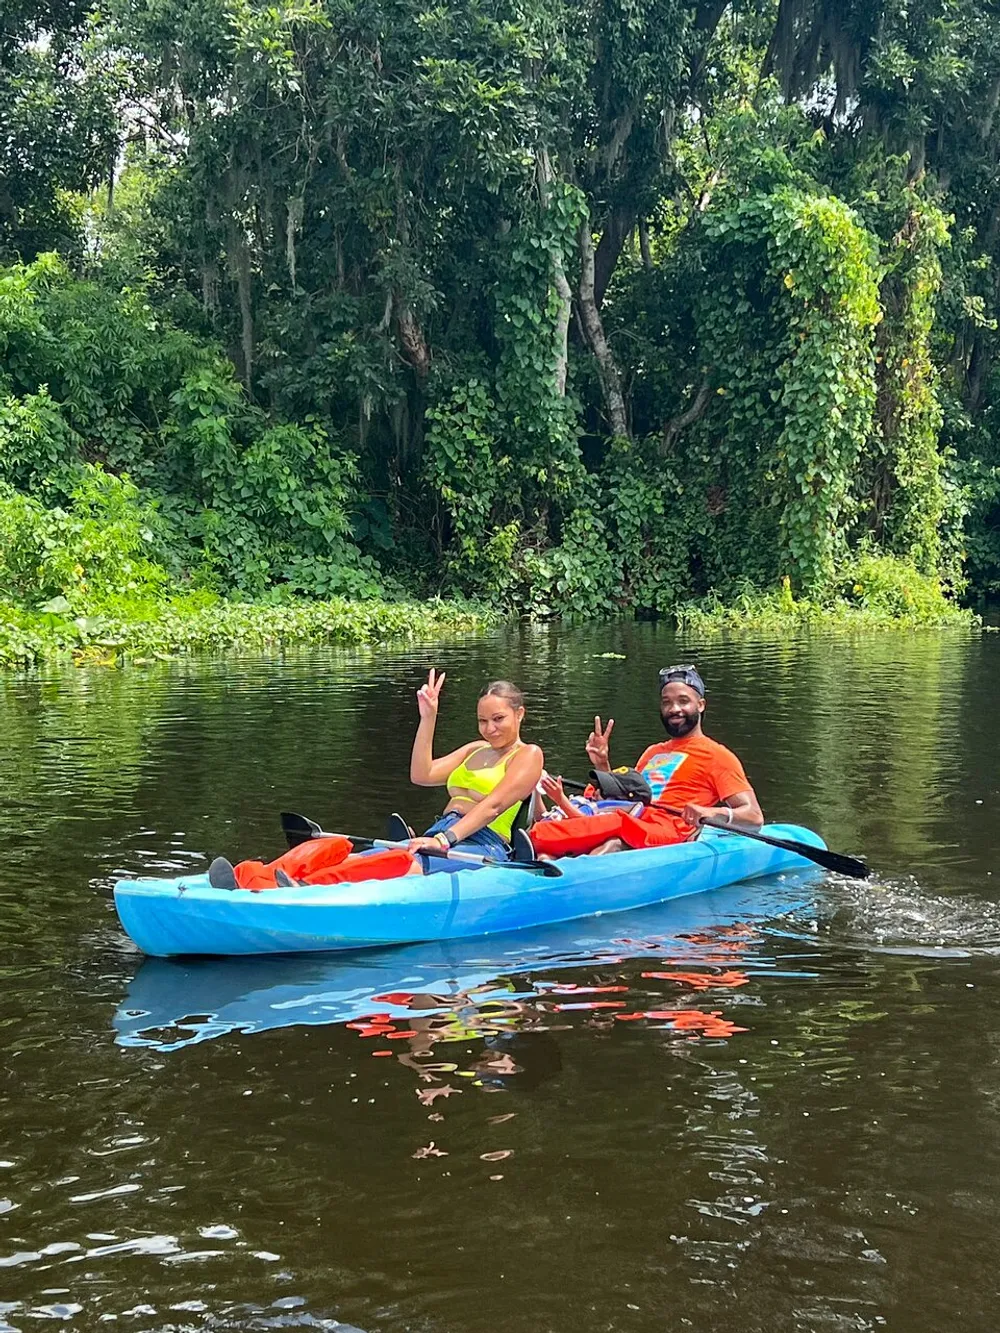 Two people are happily kayaking on a calm river surrounded by lush greenery